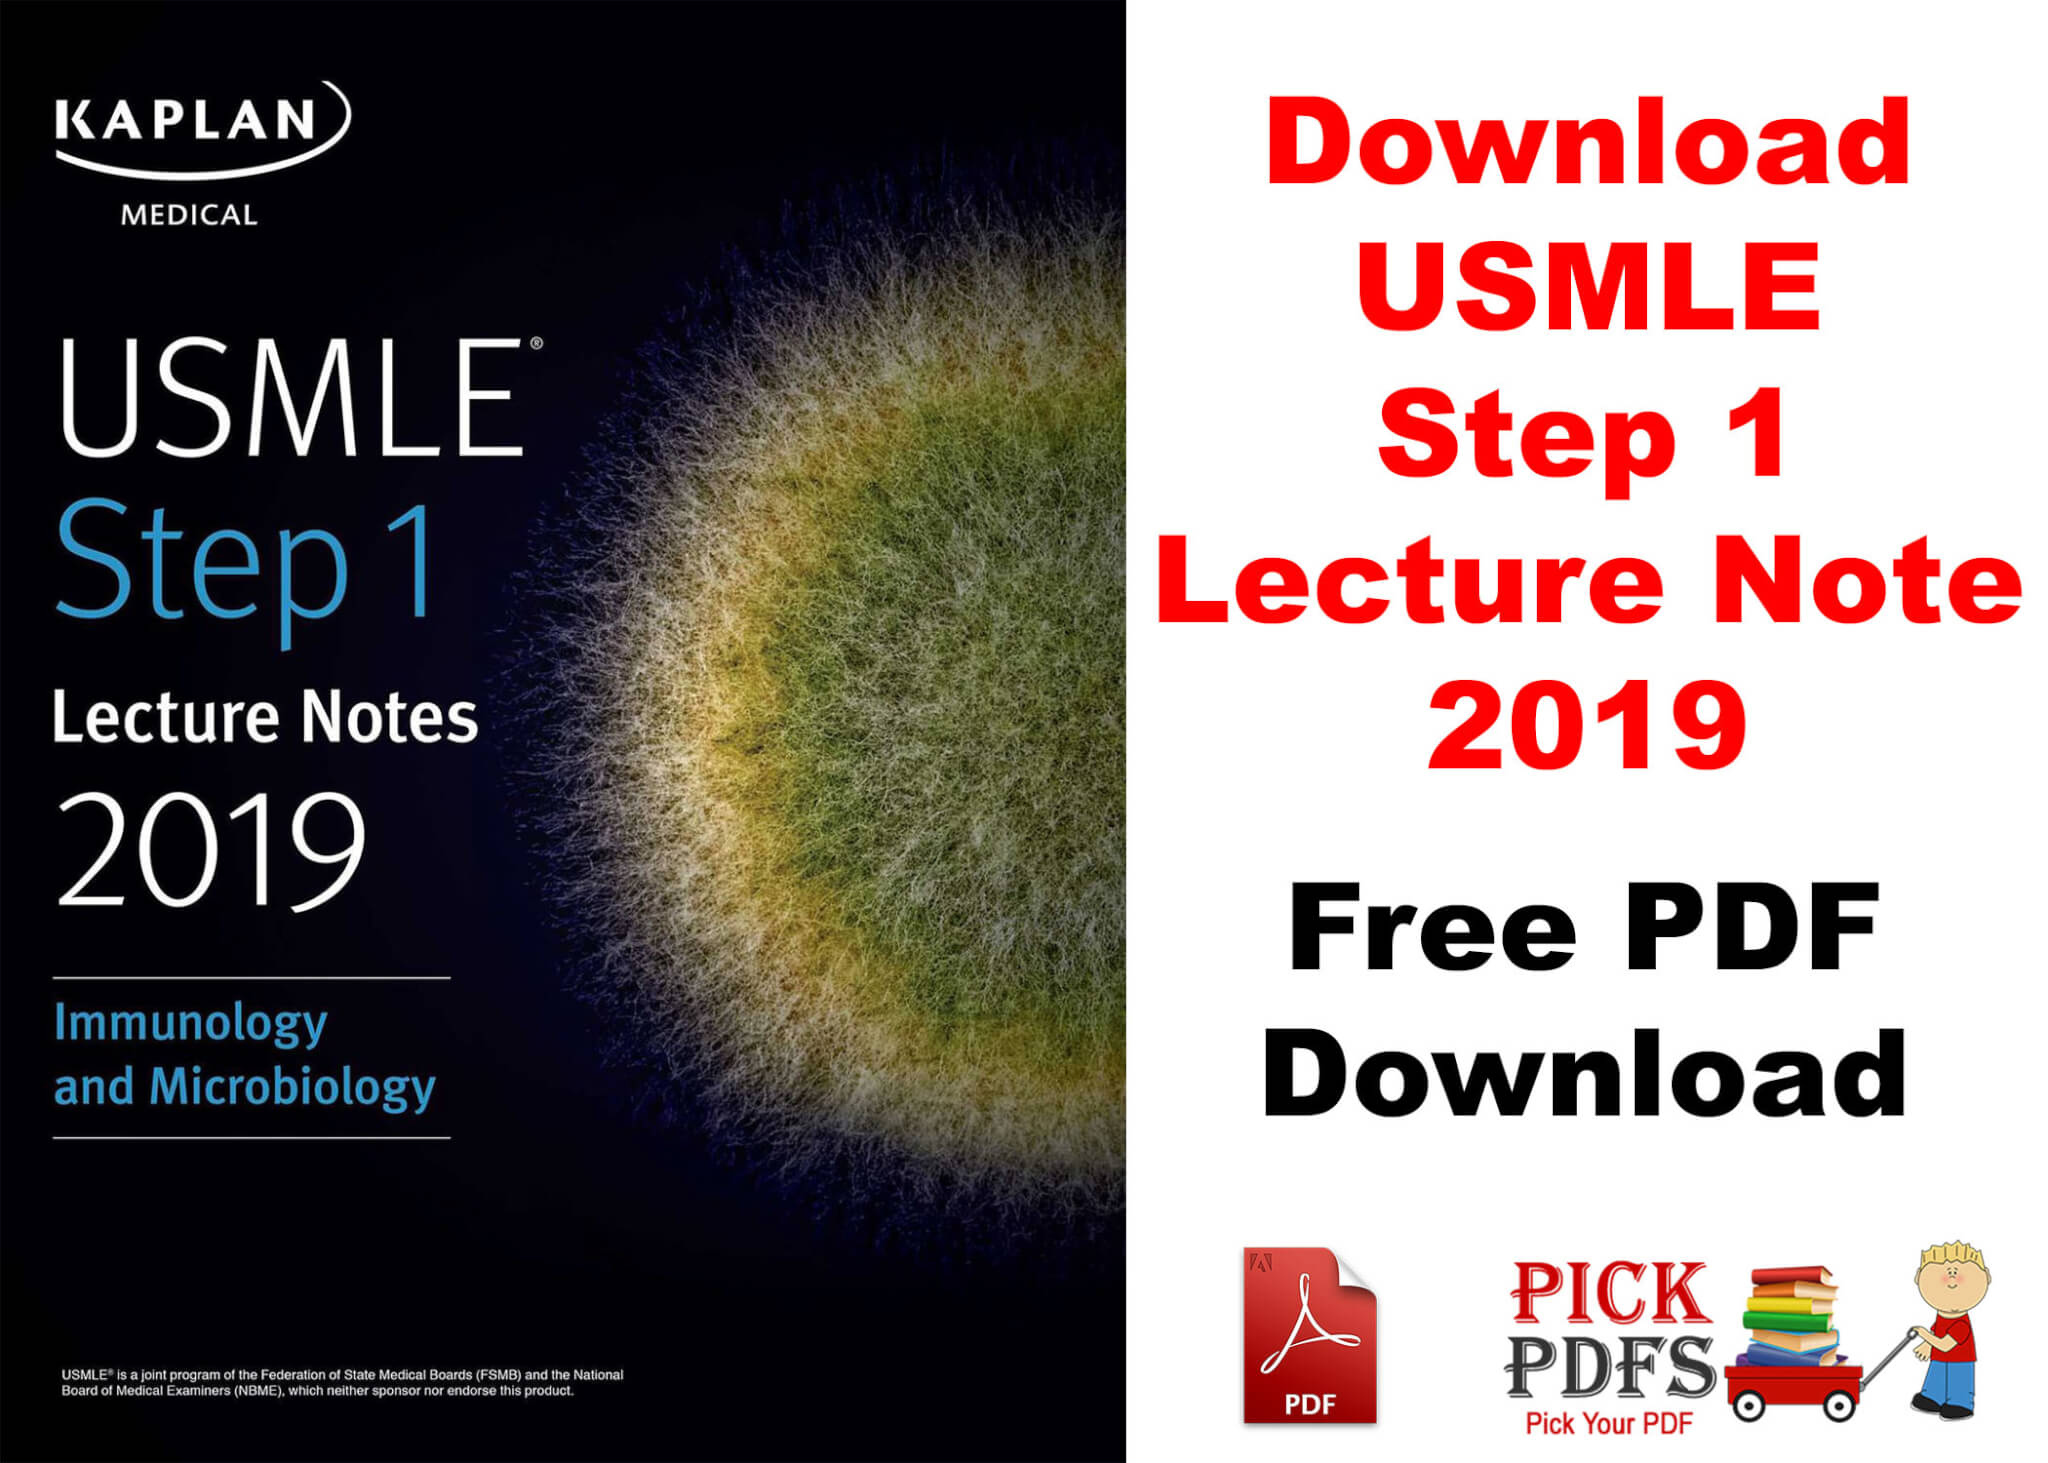 https://pickpdfs.com/usmle-step-1-lecture-notes-2018-immunology-and-microbiology-pdf-free-download-direct-link/